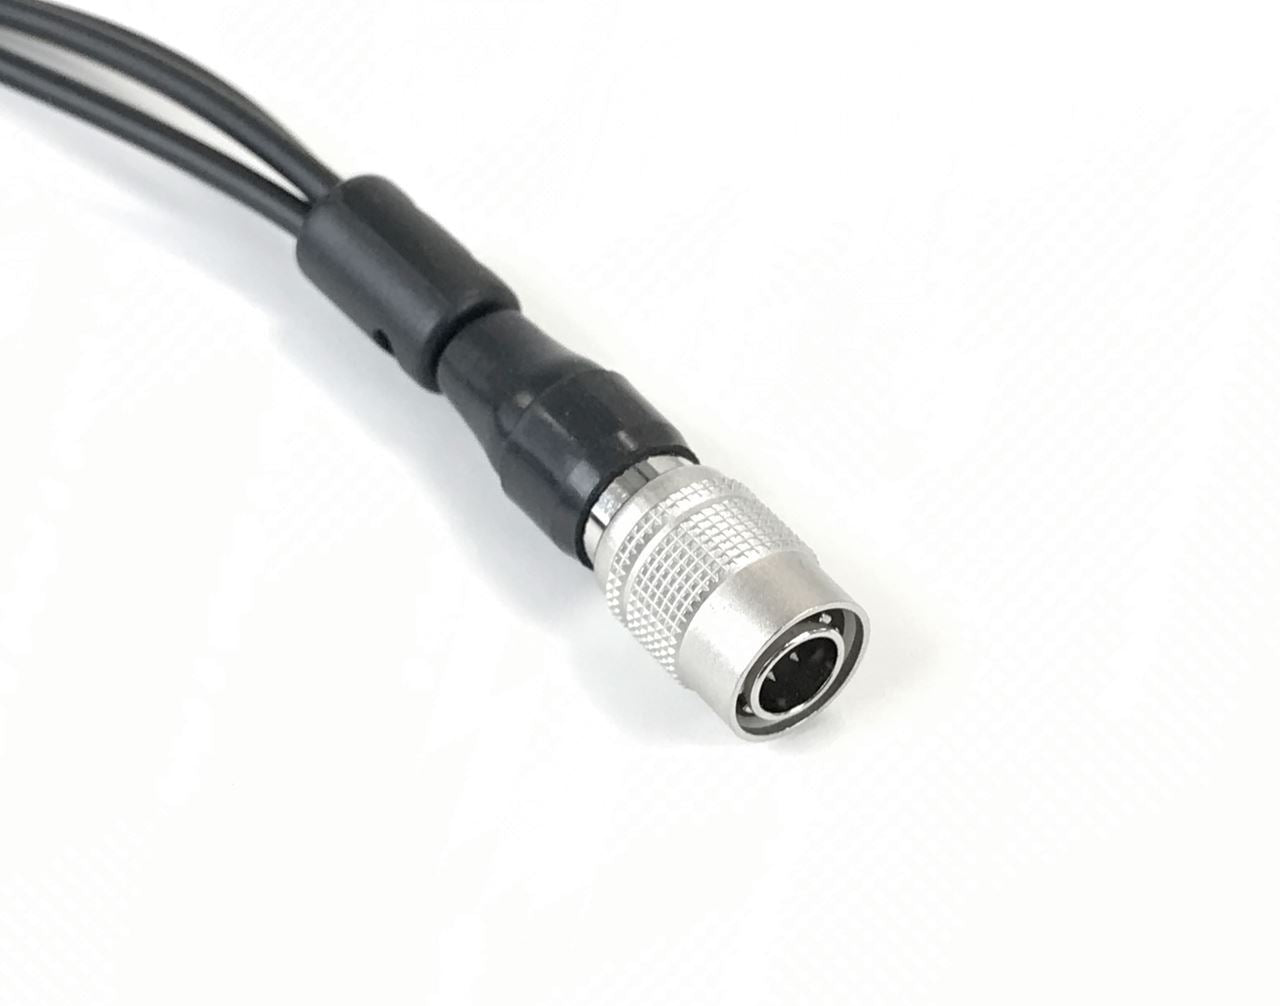 Comparable KHS-12 3 wire mini lapel mic with earphone for use with the Kenwood NX-411 Portable Radio - Waveband Communications